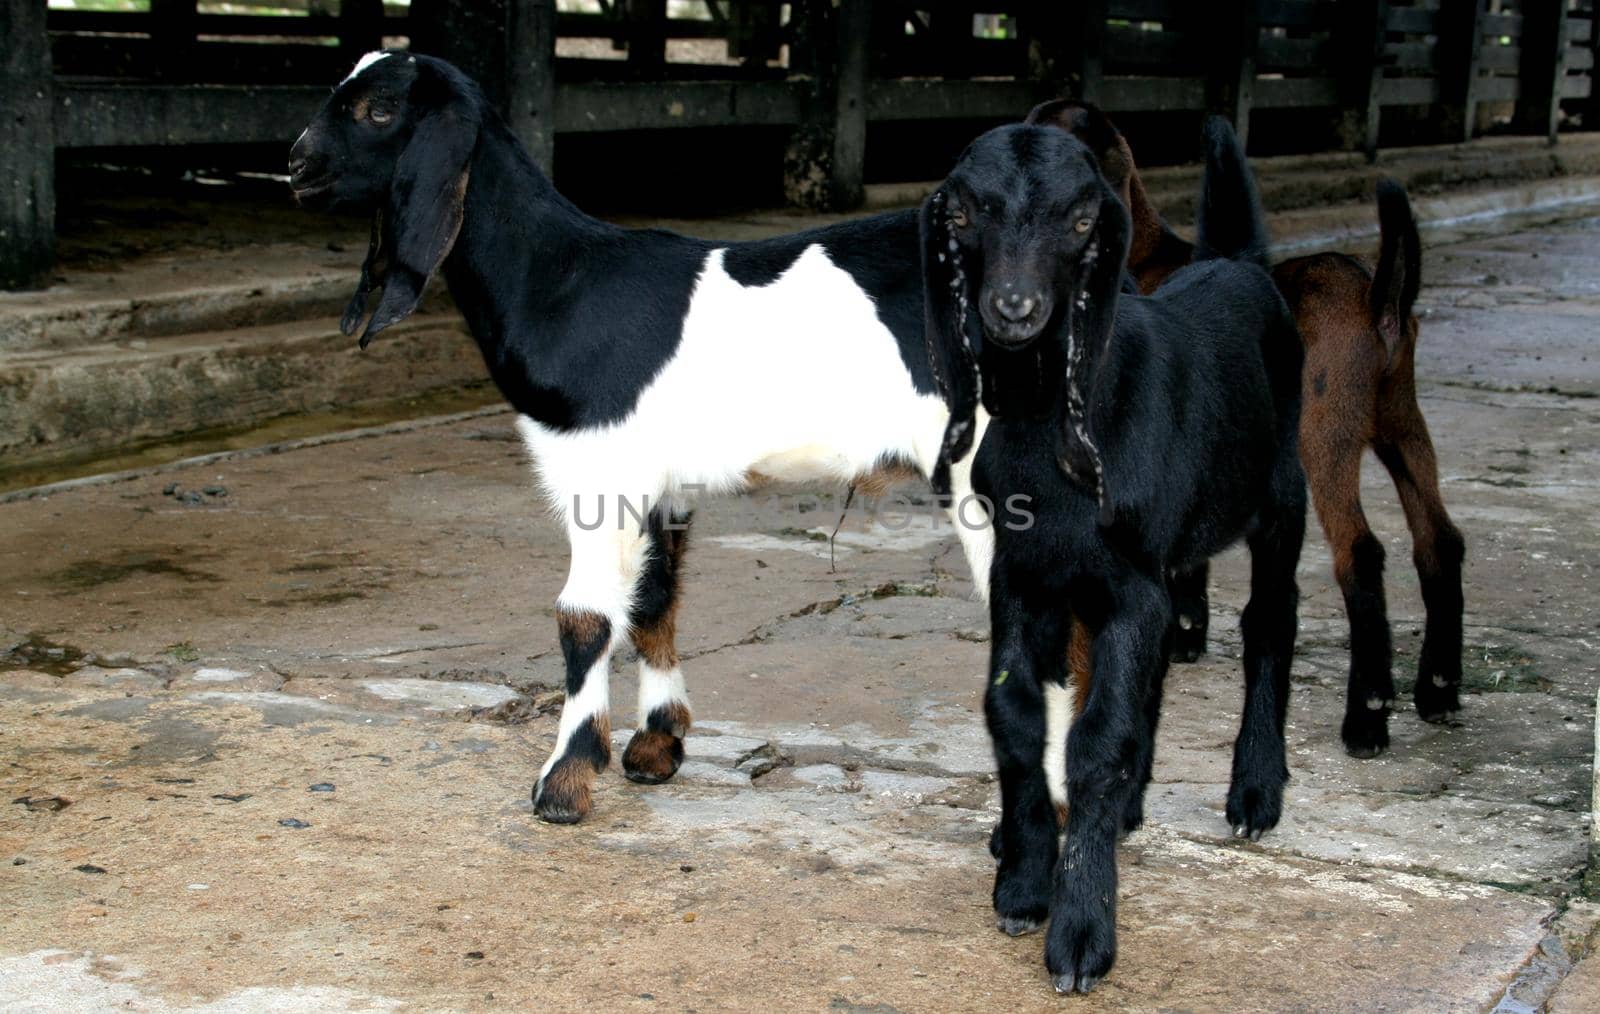 conde, bahia / brazil - may 13, 2007: goats are seen on a farm in the city of Conde.

